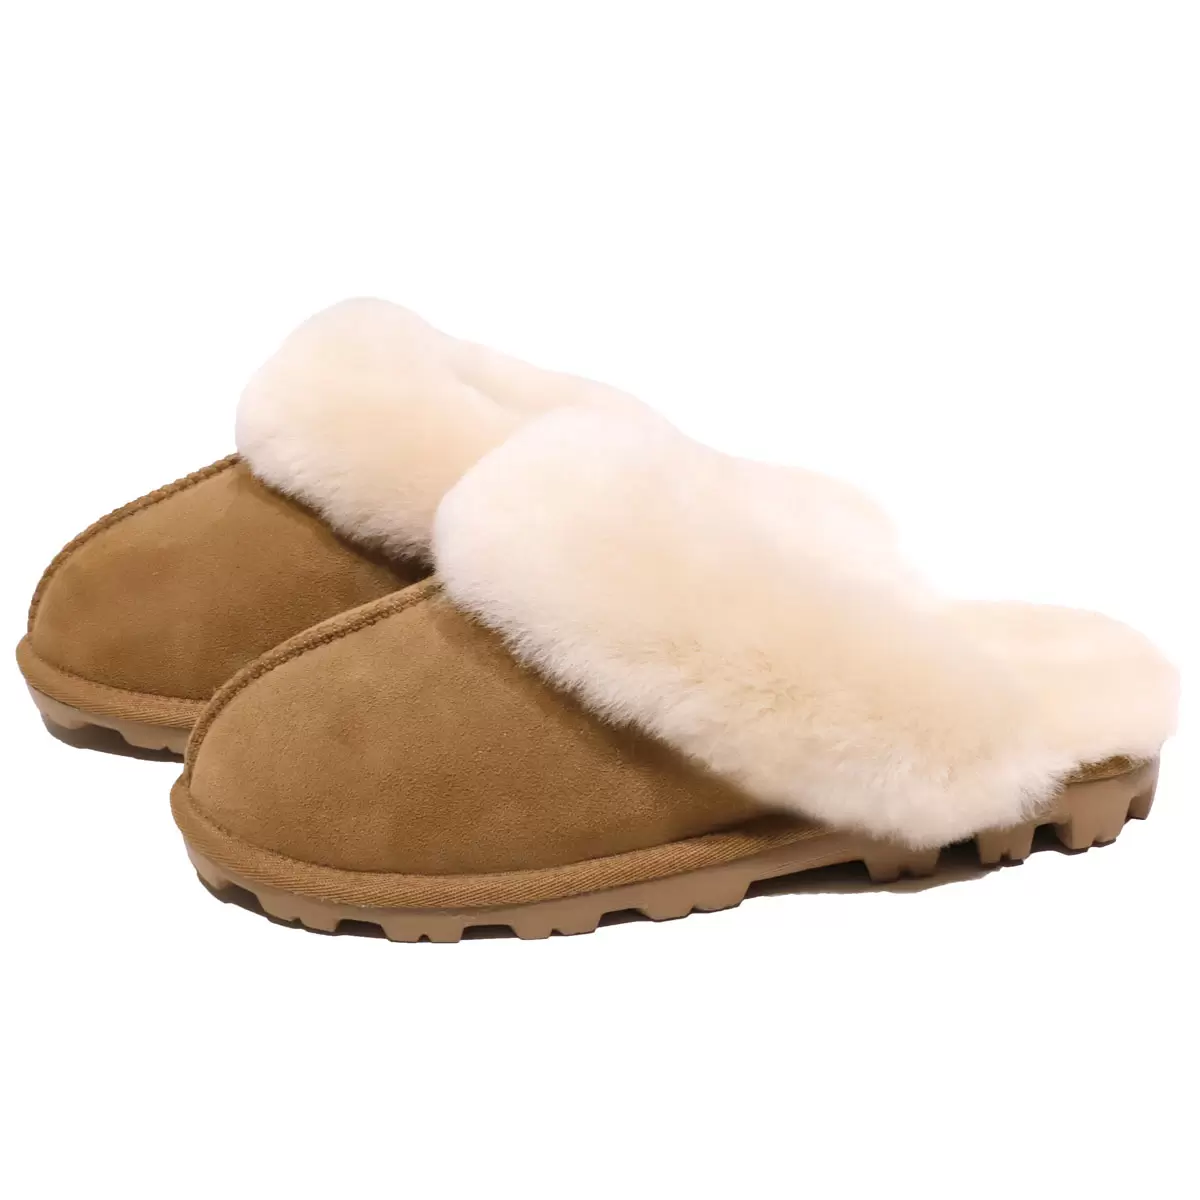 Kirkland Signature Women's Shearling Slippers in 2 Colours and 5 Sizes